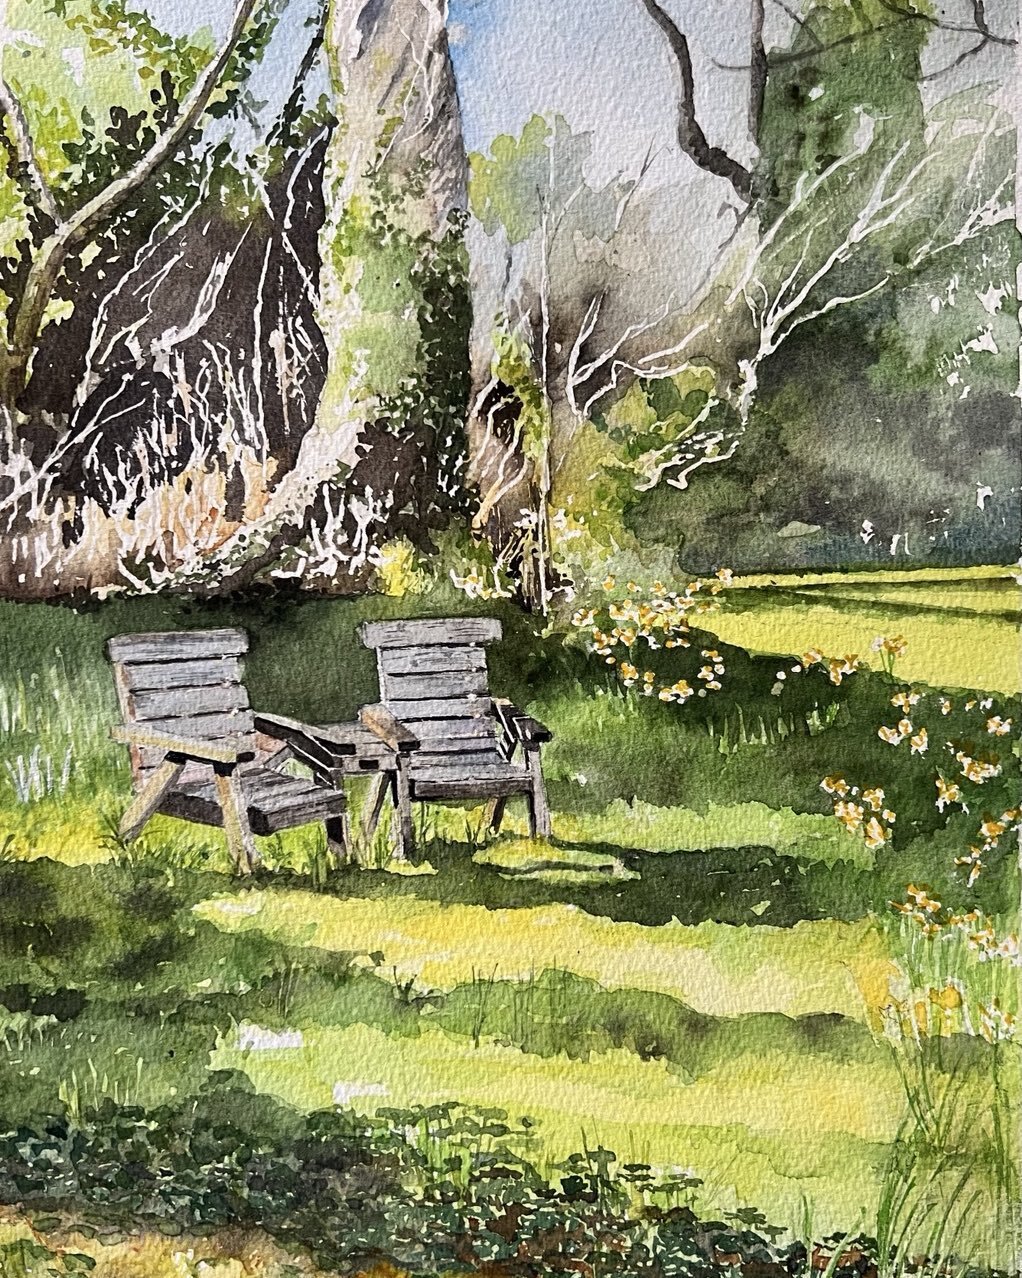 SPRING
 Original watercolour Size 26x36cms
.
.
Hope to our in the garden this Easter 🐣
.
.
.
#artnetdlr
#waltersdunlaoighre
#watercolour
#watercolourpainting
#watercoloursocietyofireland
#shirleygiffney
#irishart
#irishartist
#irishwatercolourartist